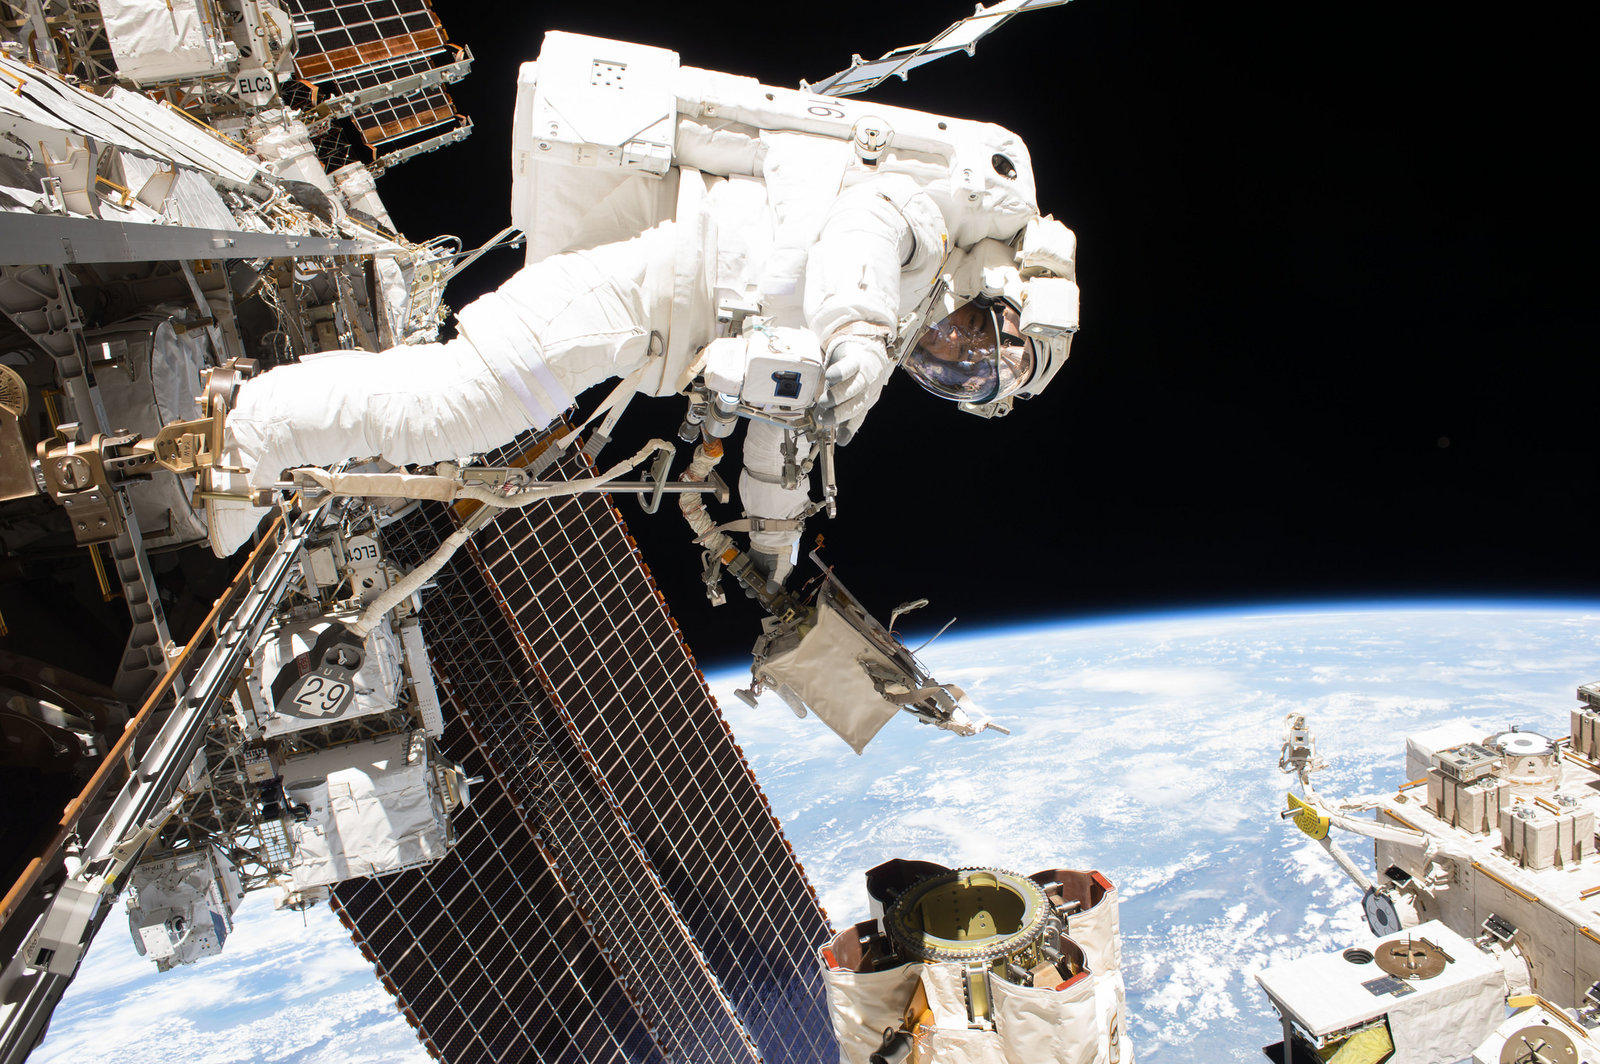 More information about "Live Coverage of U.S. Spacewalk Begins"